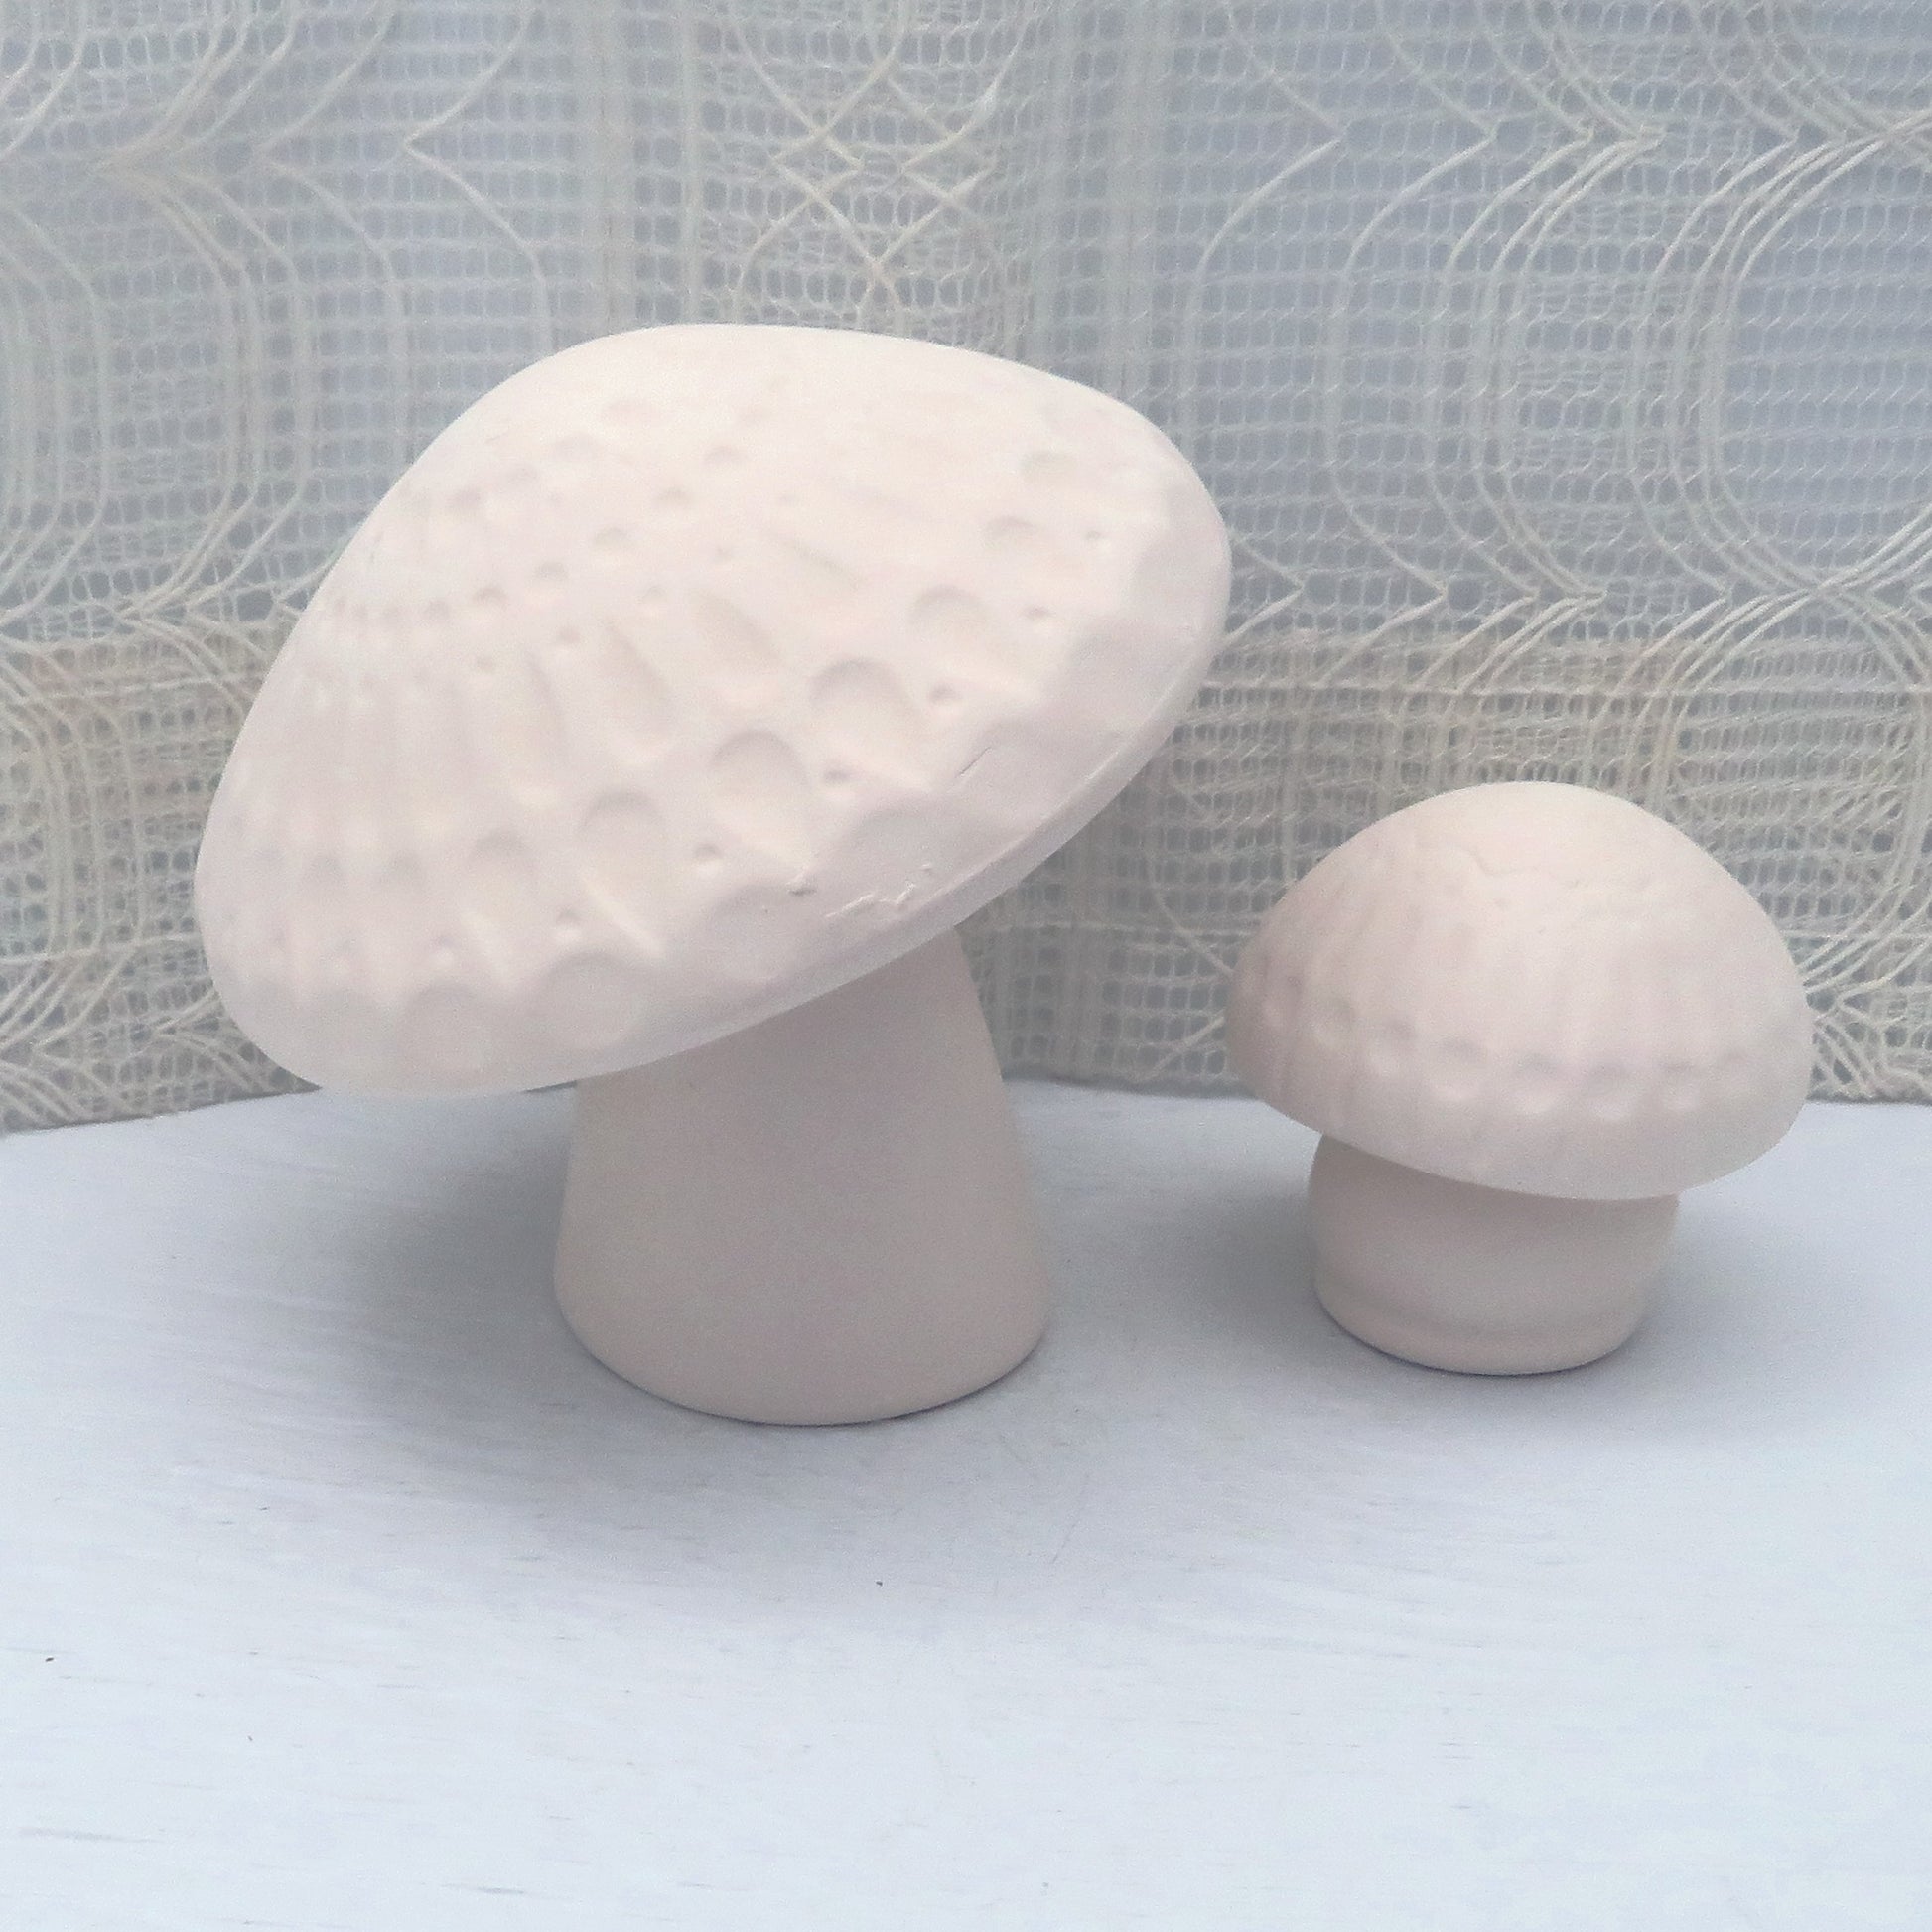 Paintable ceramic mushroom statues on a blue table with an ecru lacy curtain behind it.  You can see and feel the texture in the tops of the mushrooms.  One mushroom is larger, one smaller.